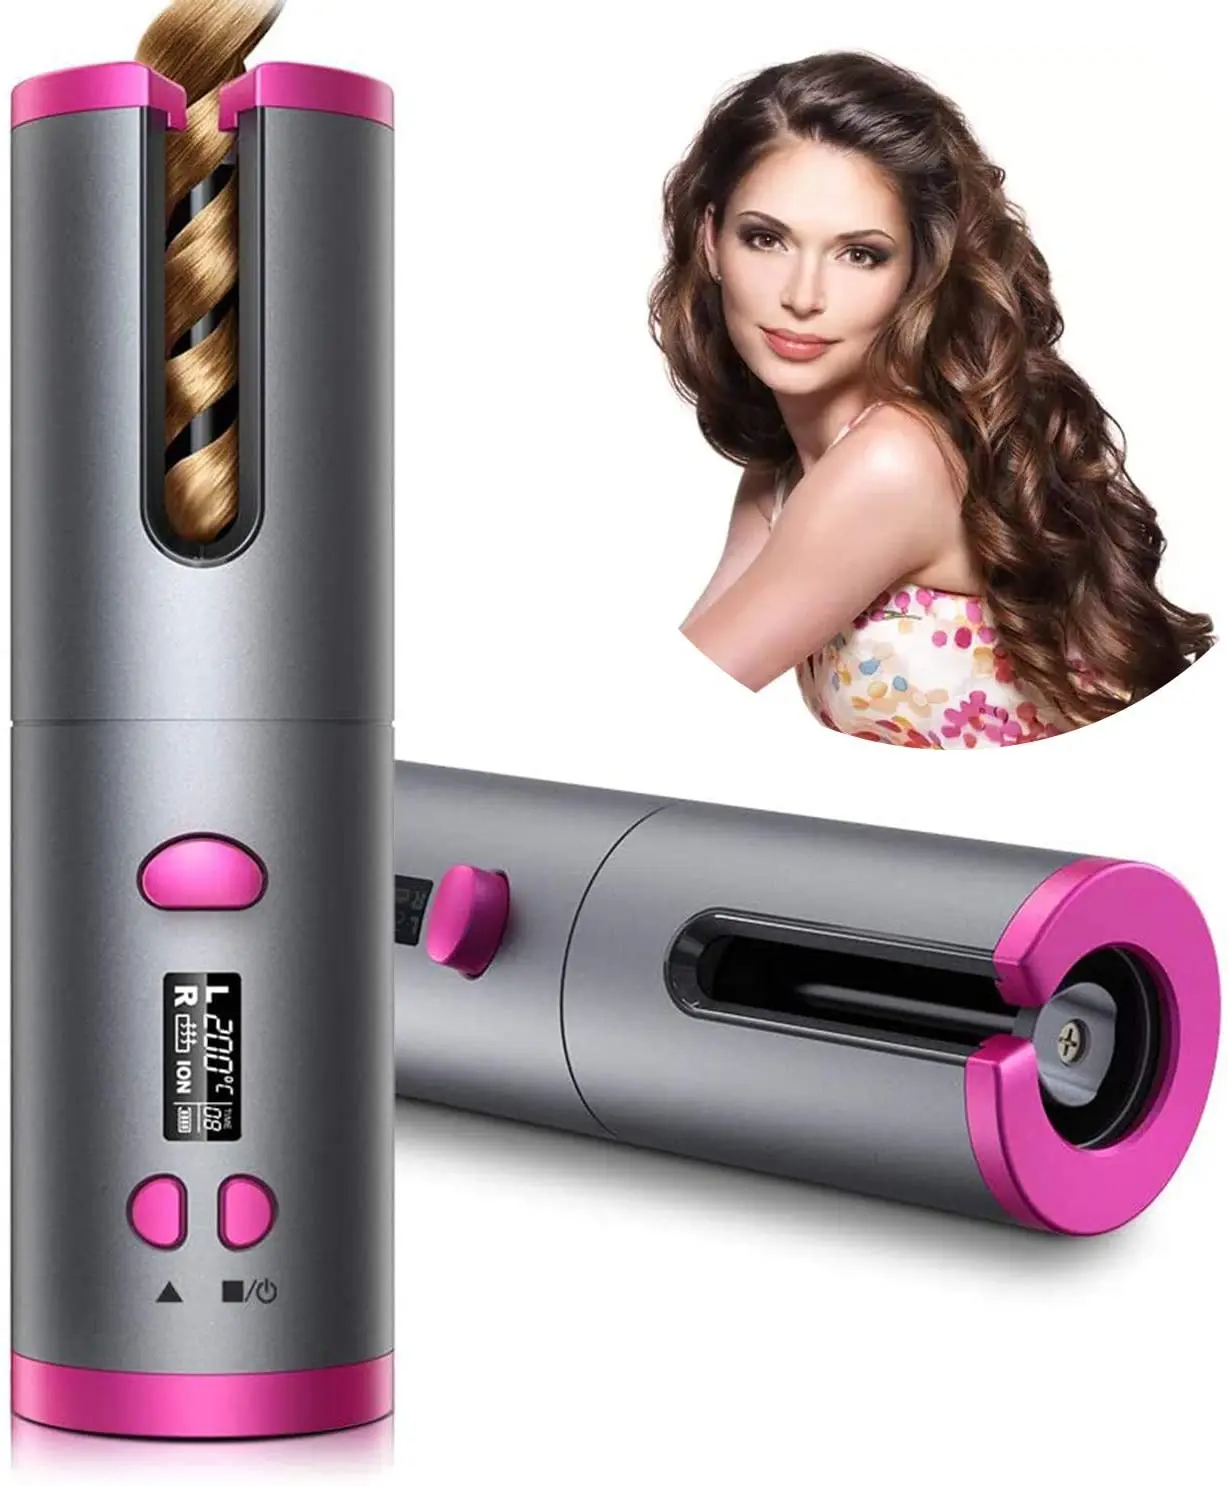 

Cordless Automatic Rotating Hair Curler USB Rechargeable Curling Iron LED Display Temperature Adjustable styling tool Wave GH1